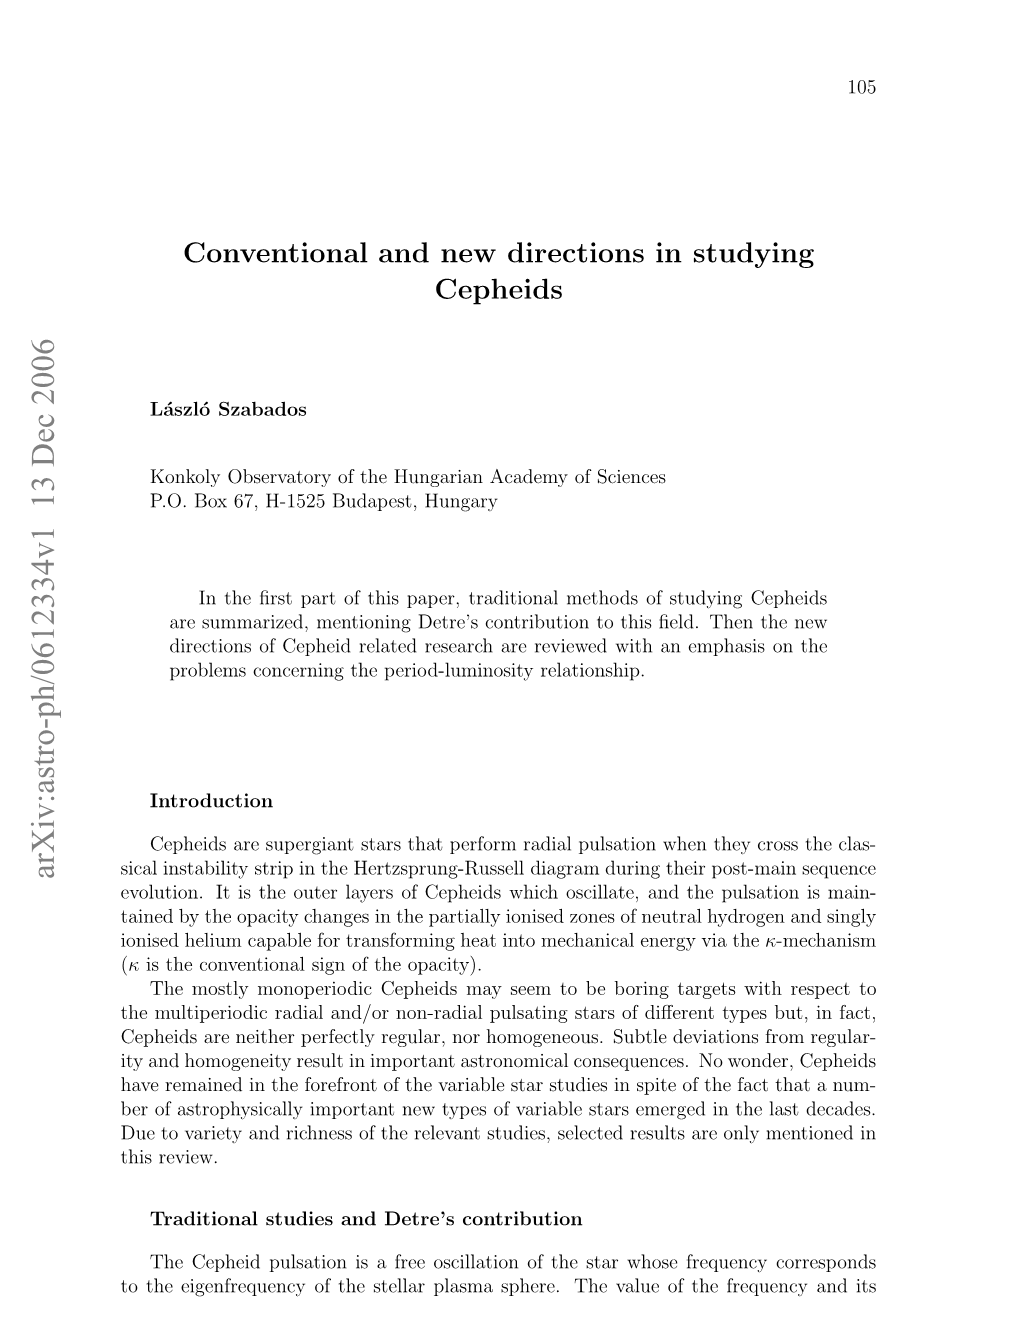 Conventional and New Directions in Studying Cepheids